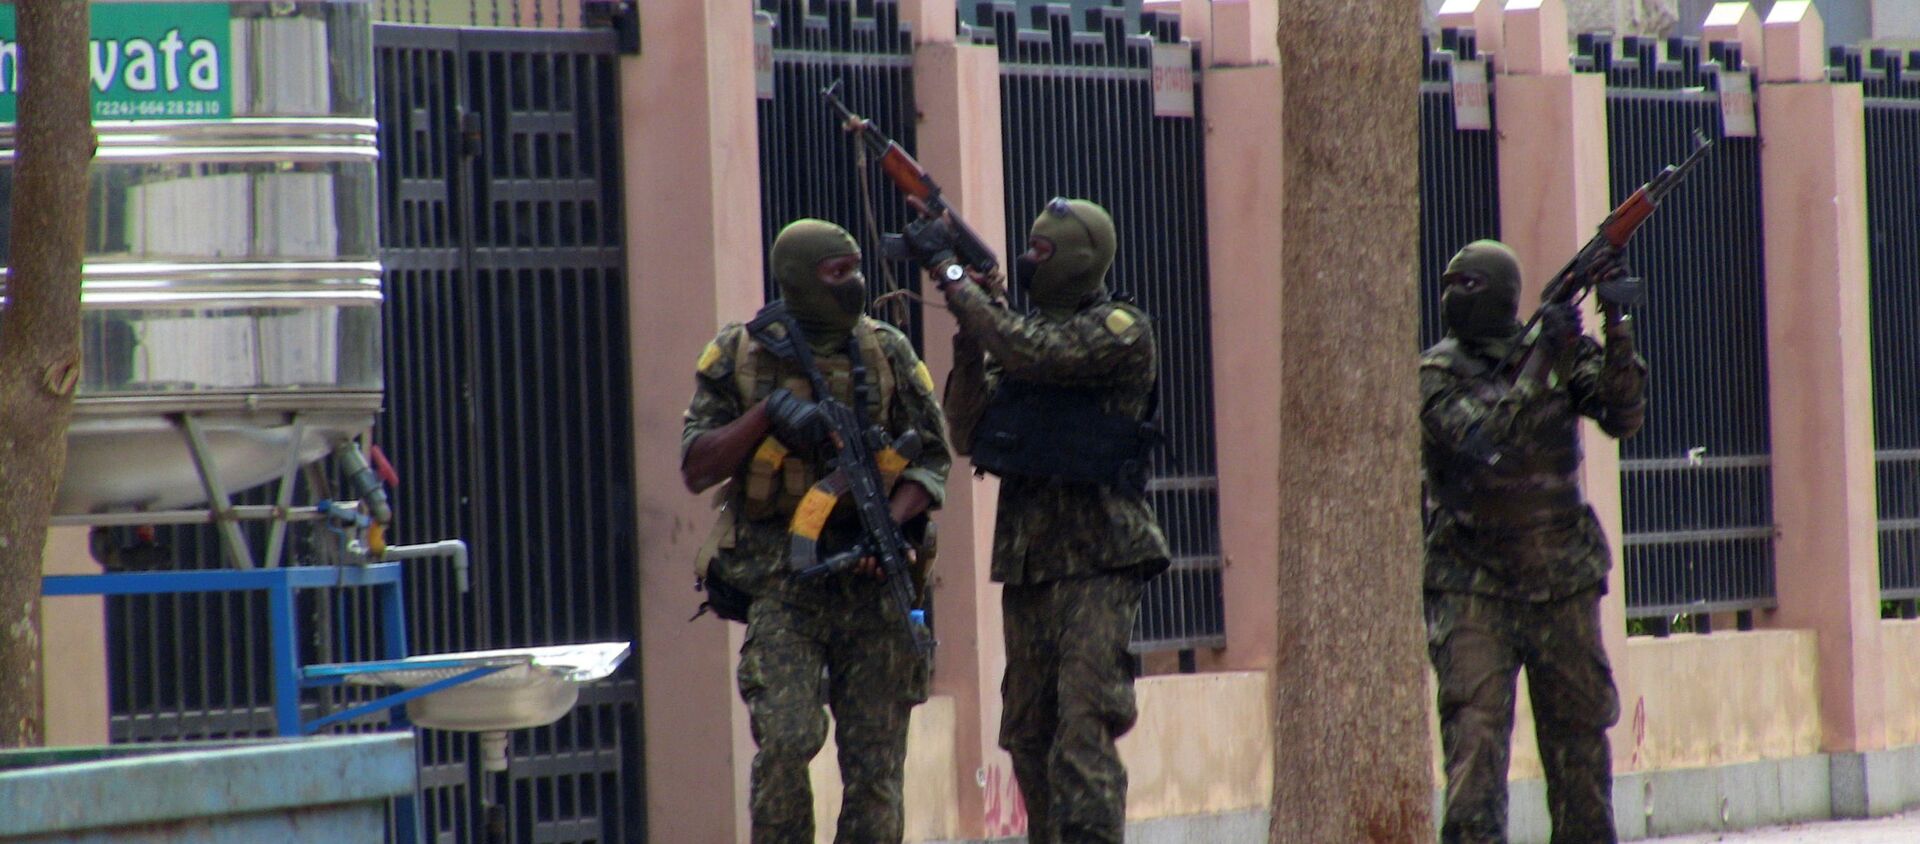 Special forces members are seen during an uprising that led to the toppling of president Alpha Conde in Kaloum neighbourhood of Conakry, Guinea September 5, 2021 - Sputnik International, 1920, 06.09.2021